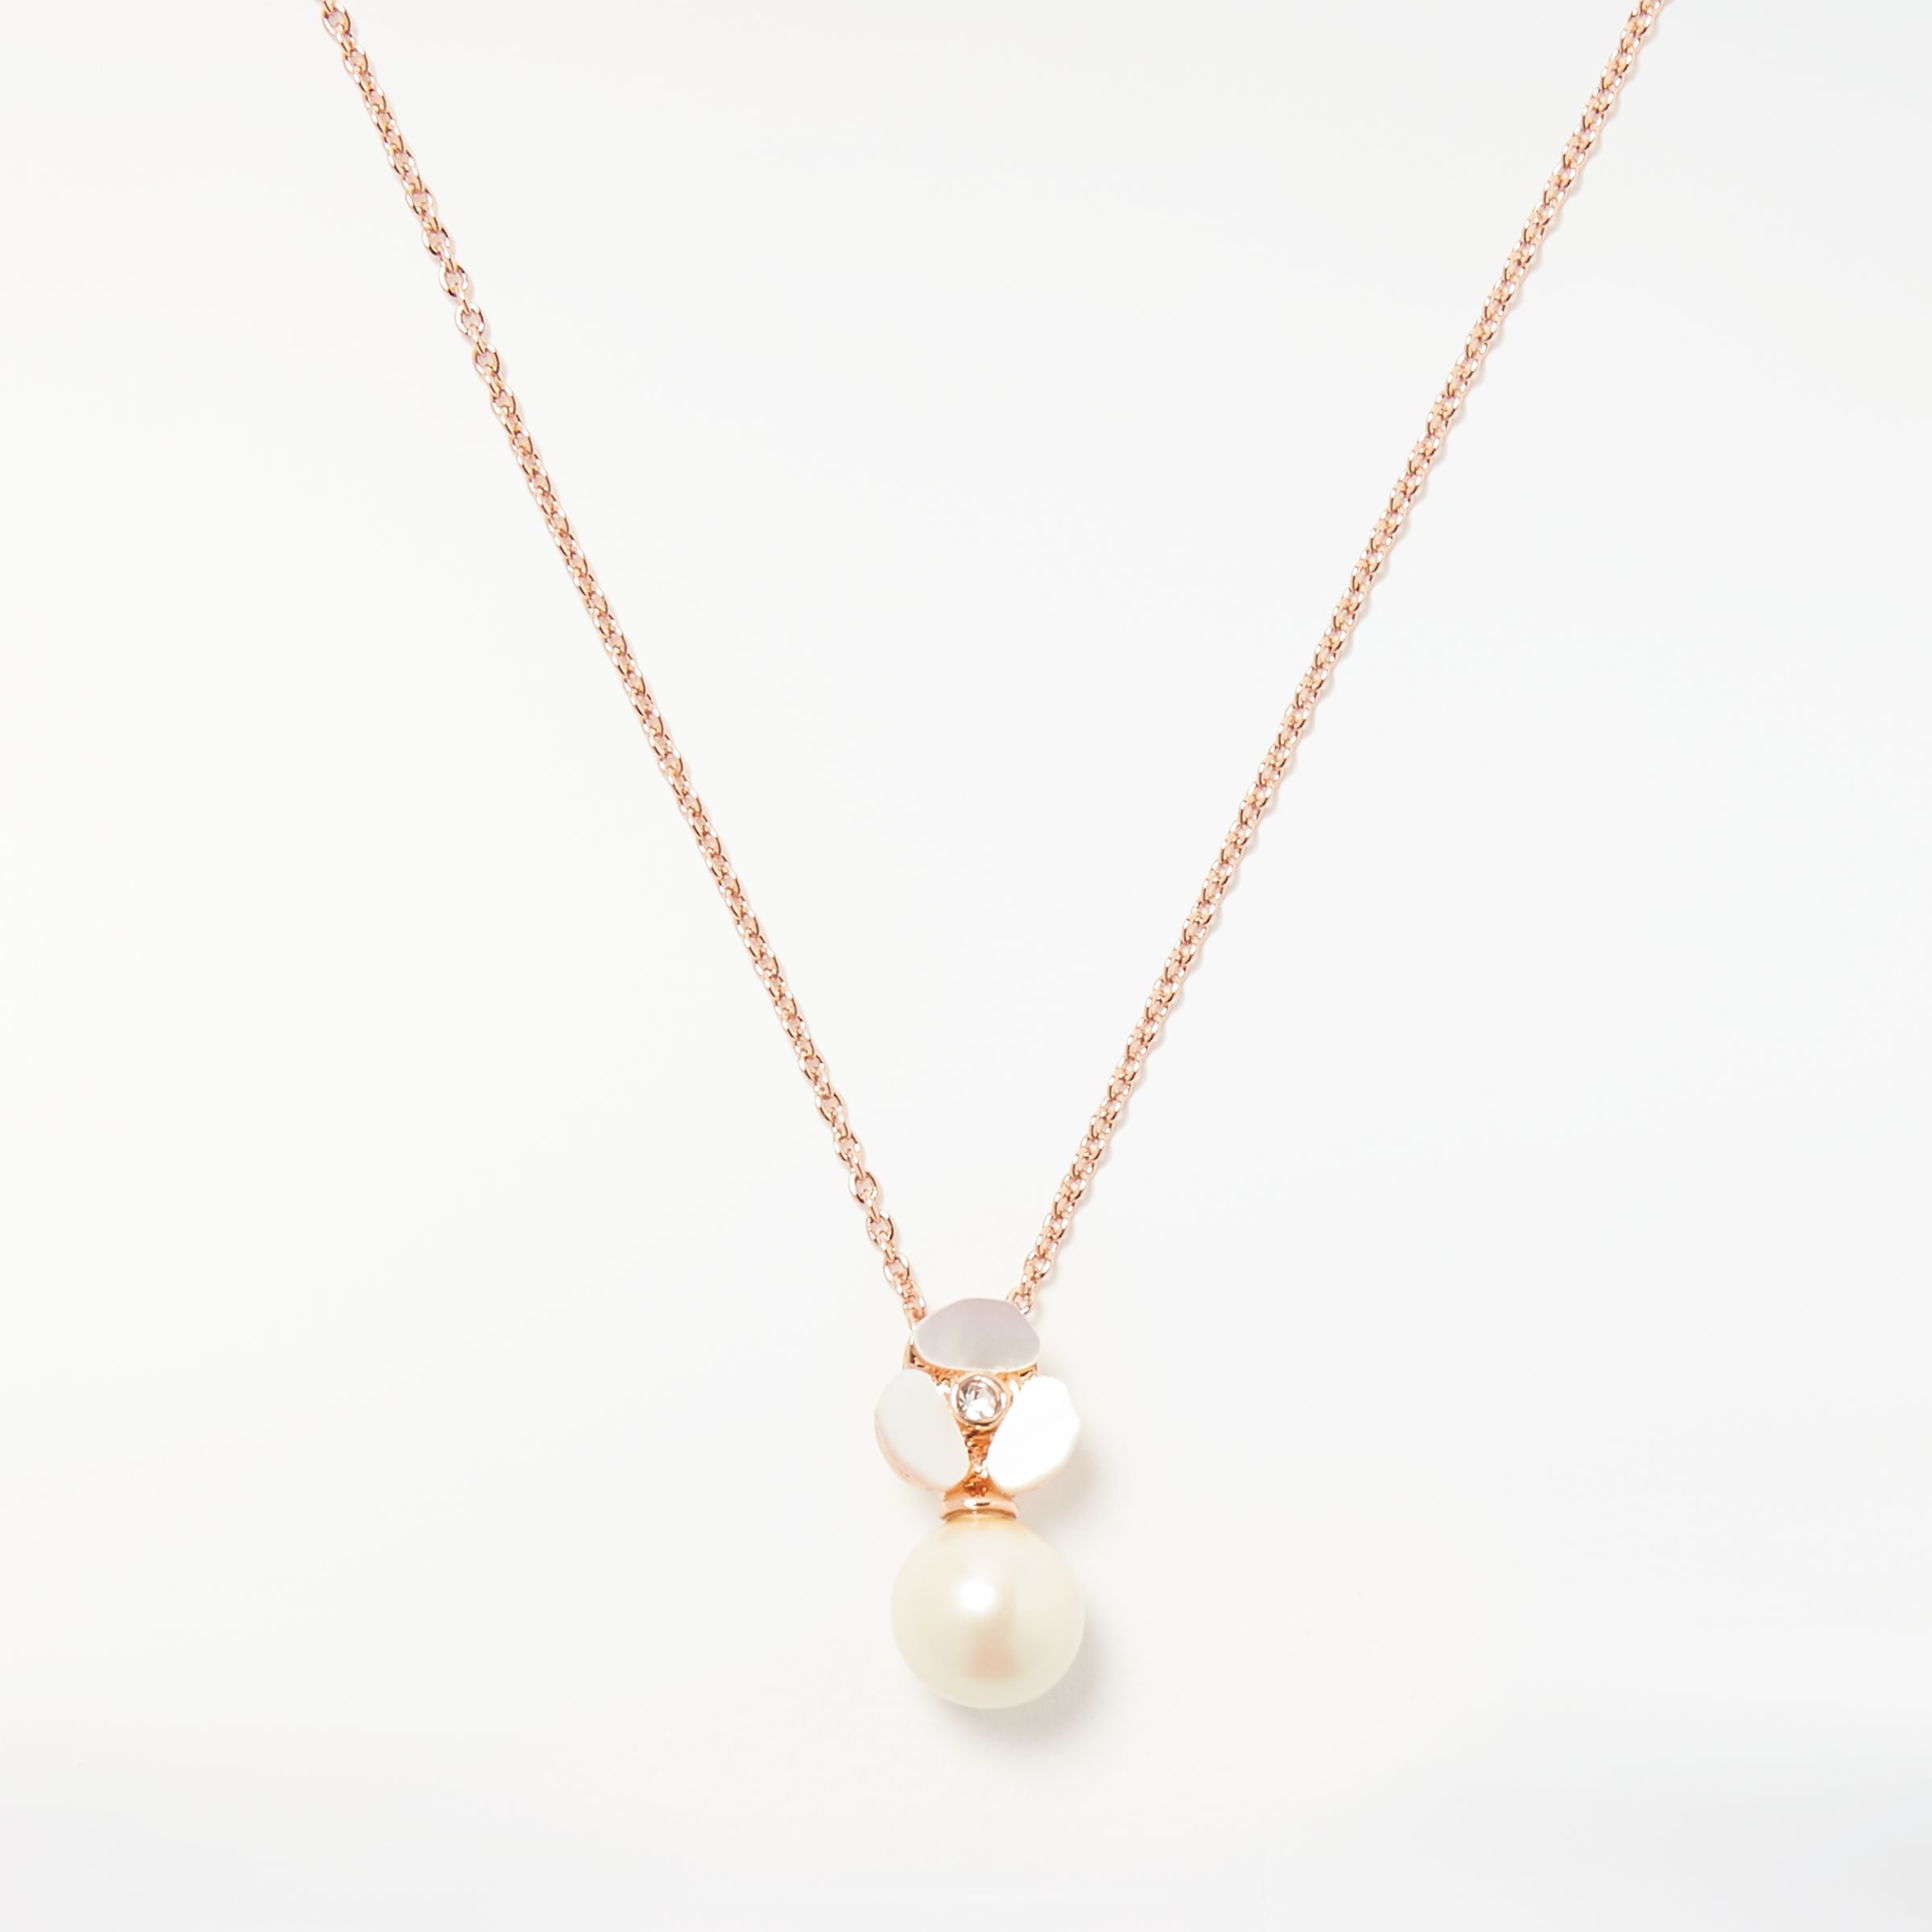 kate spade new york Mini Pansy Flower Faux Pearl Drop Pendant Necklace,  Rose Gold/Cream